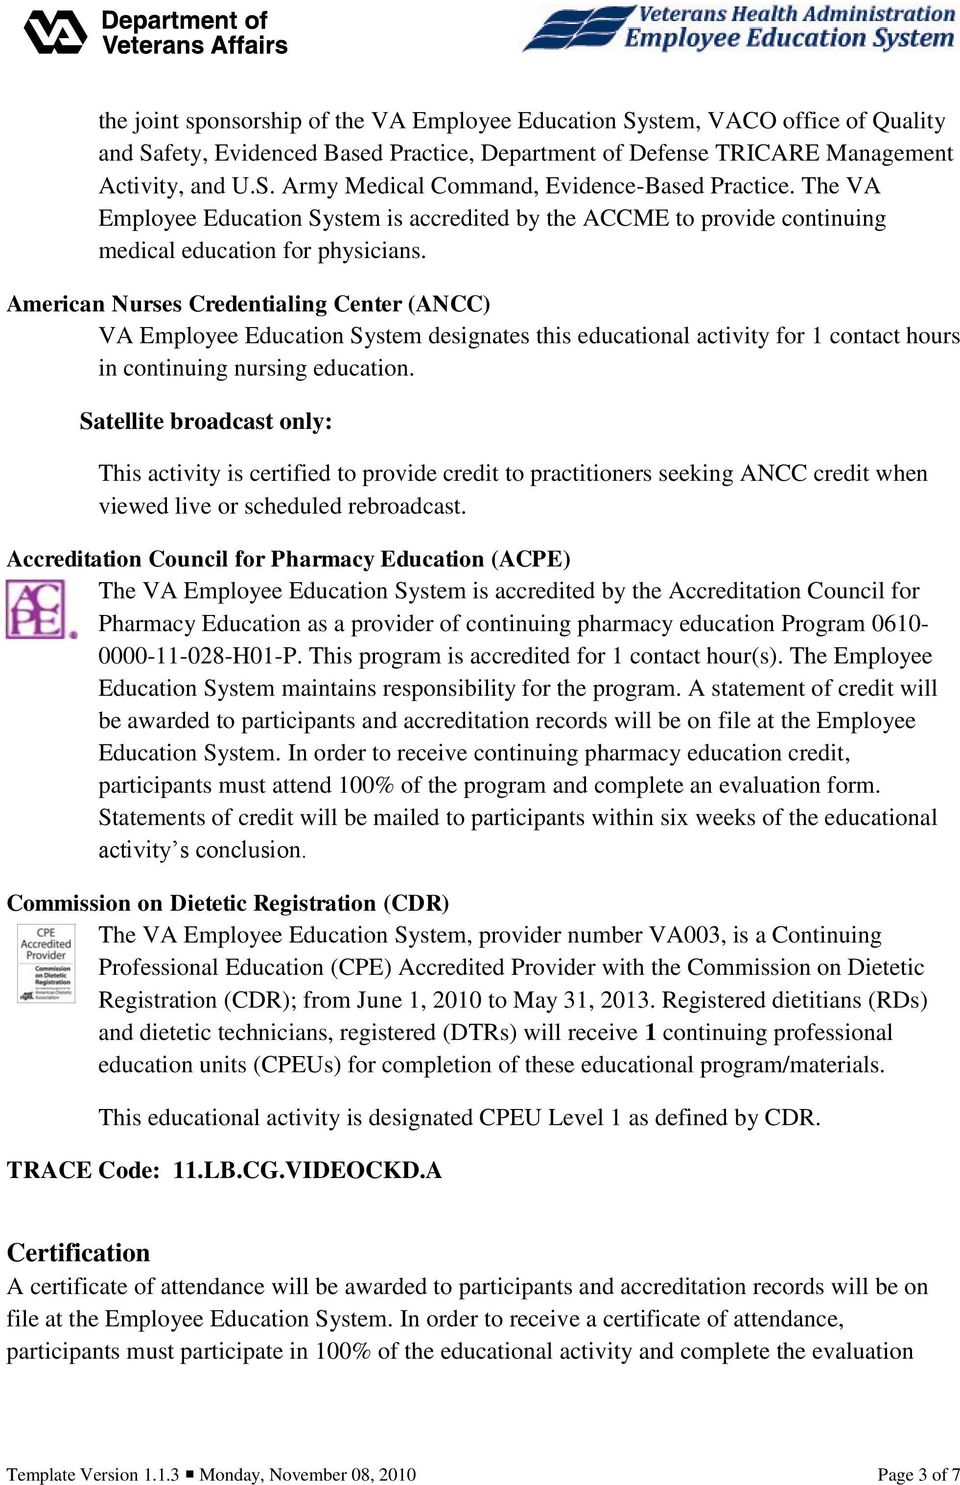 American Nurses Credentialing Center (ANCC) VA Employee Education System designates this educational activity for 1 contact hours in continuing nursing education.